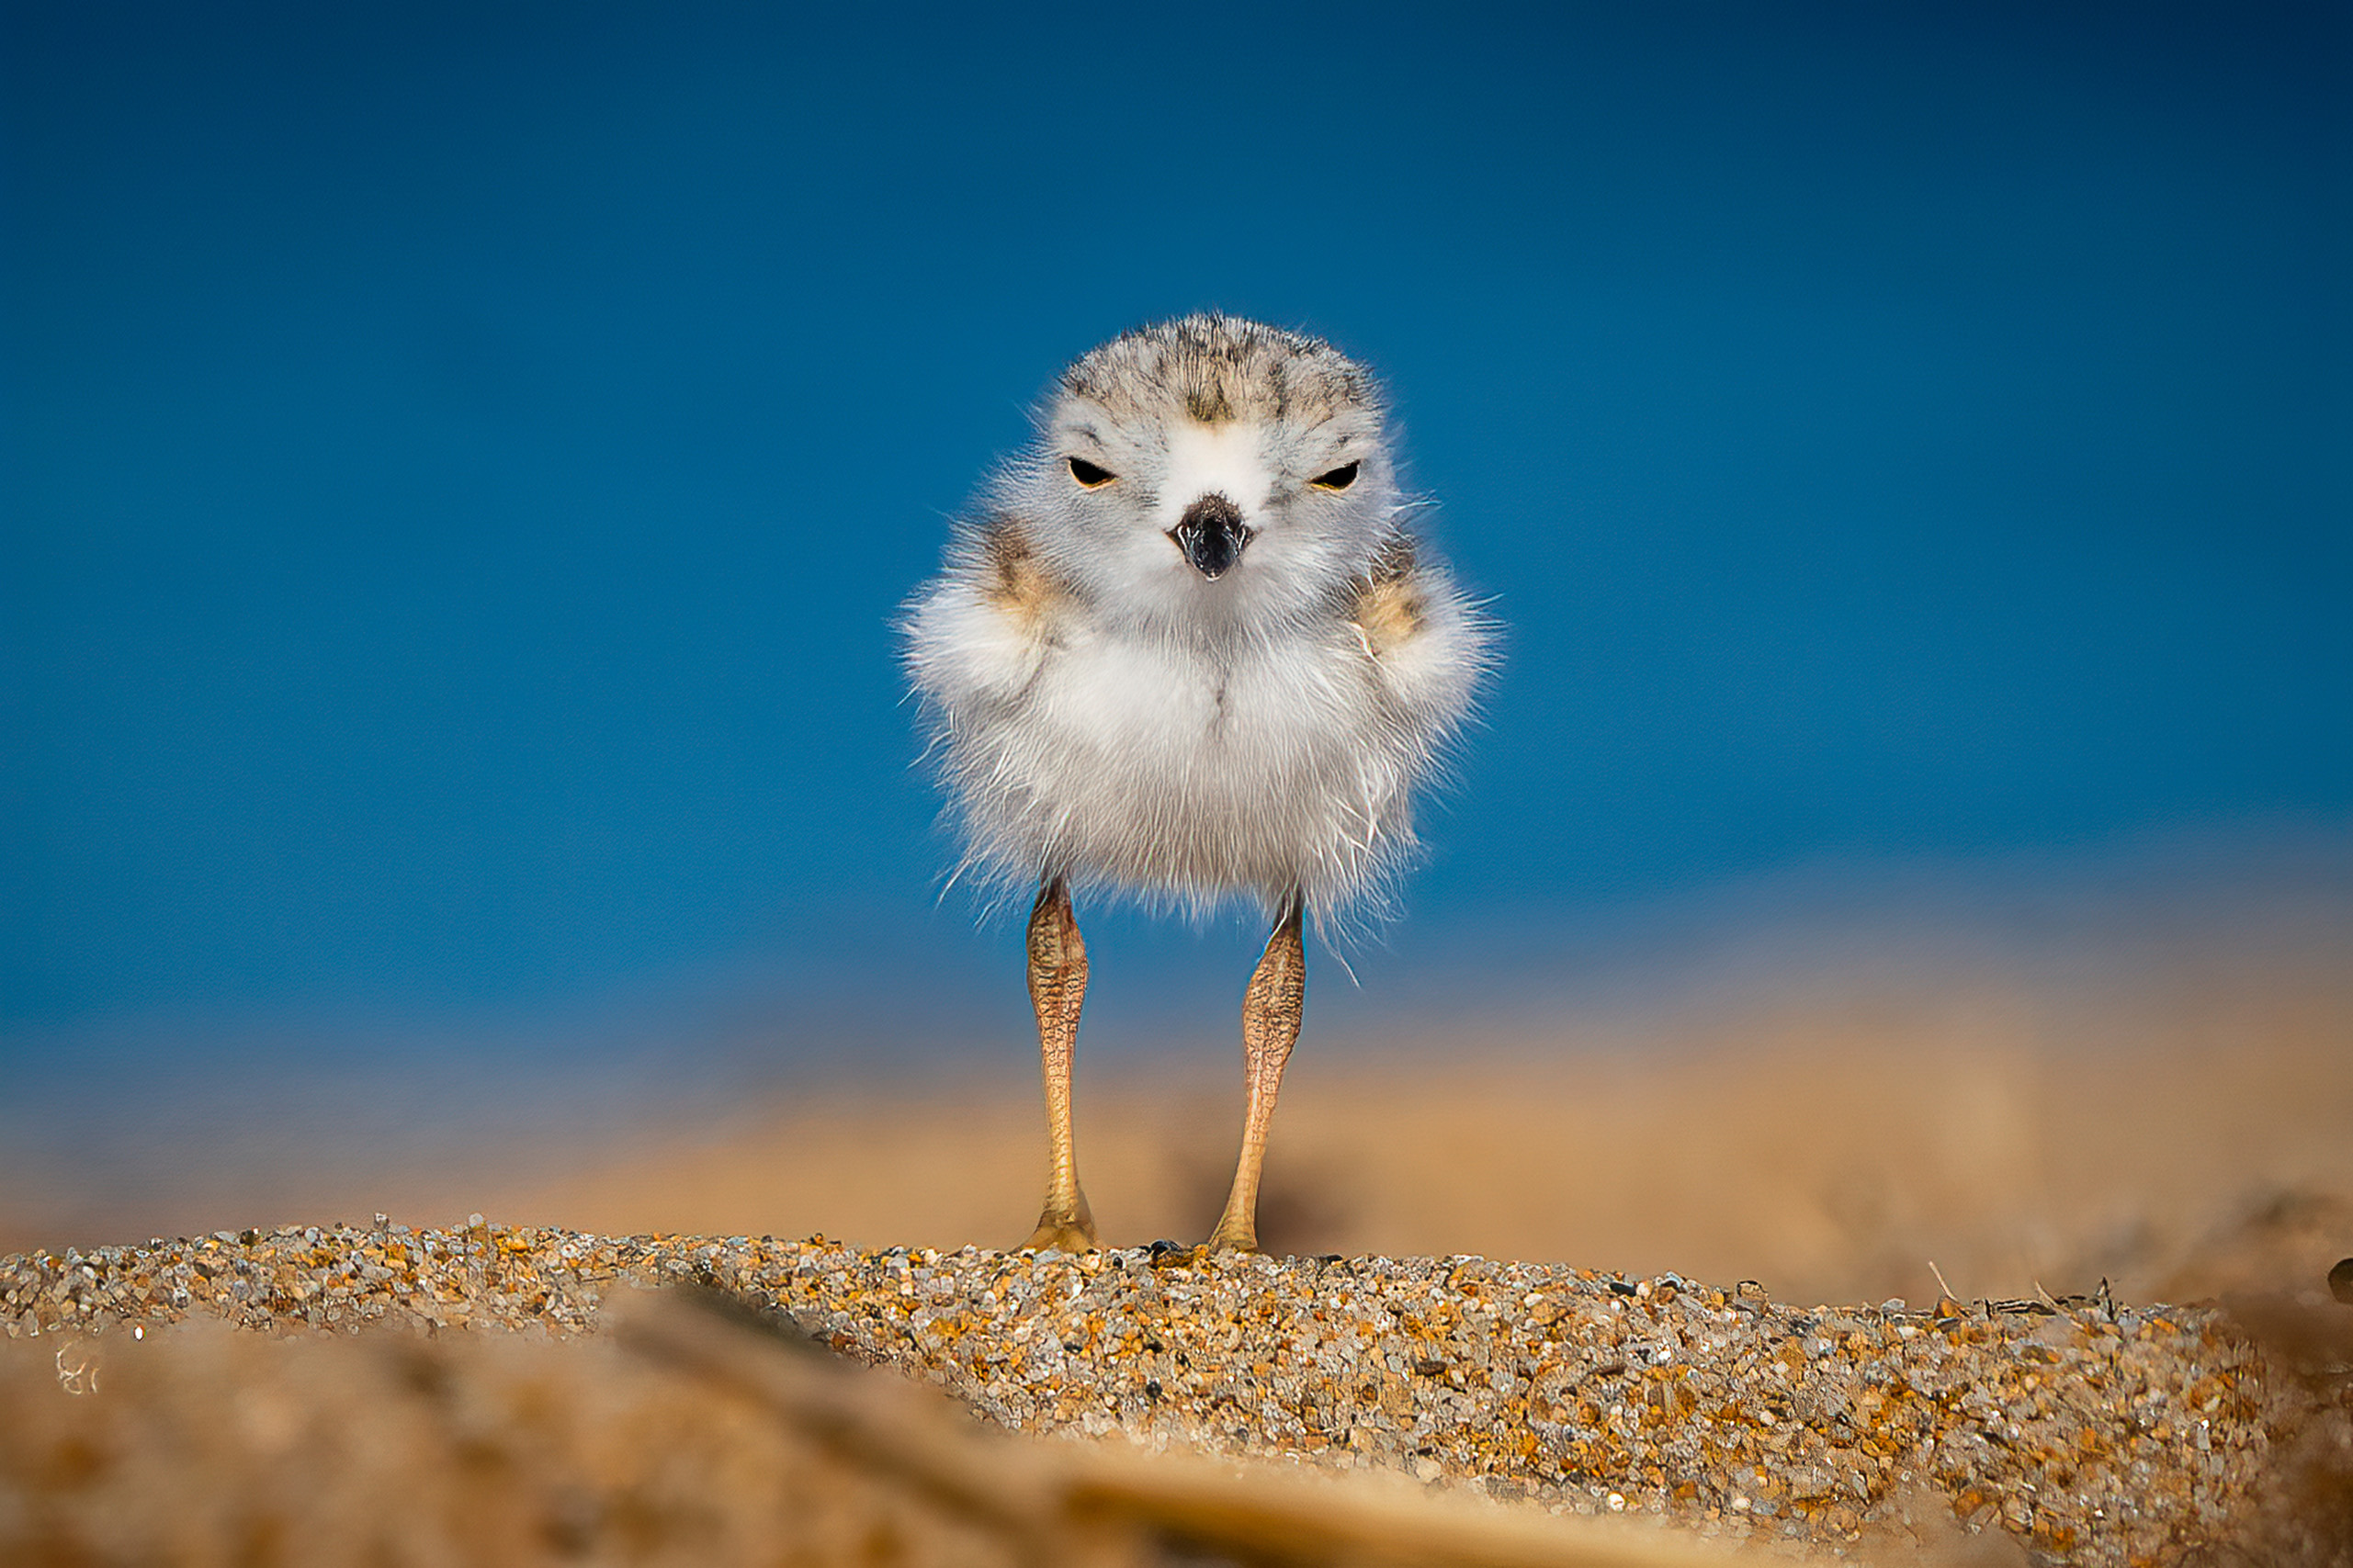 Image of a piping plover chick standing on sand against a blue background